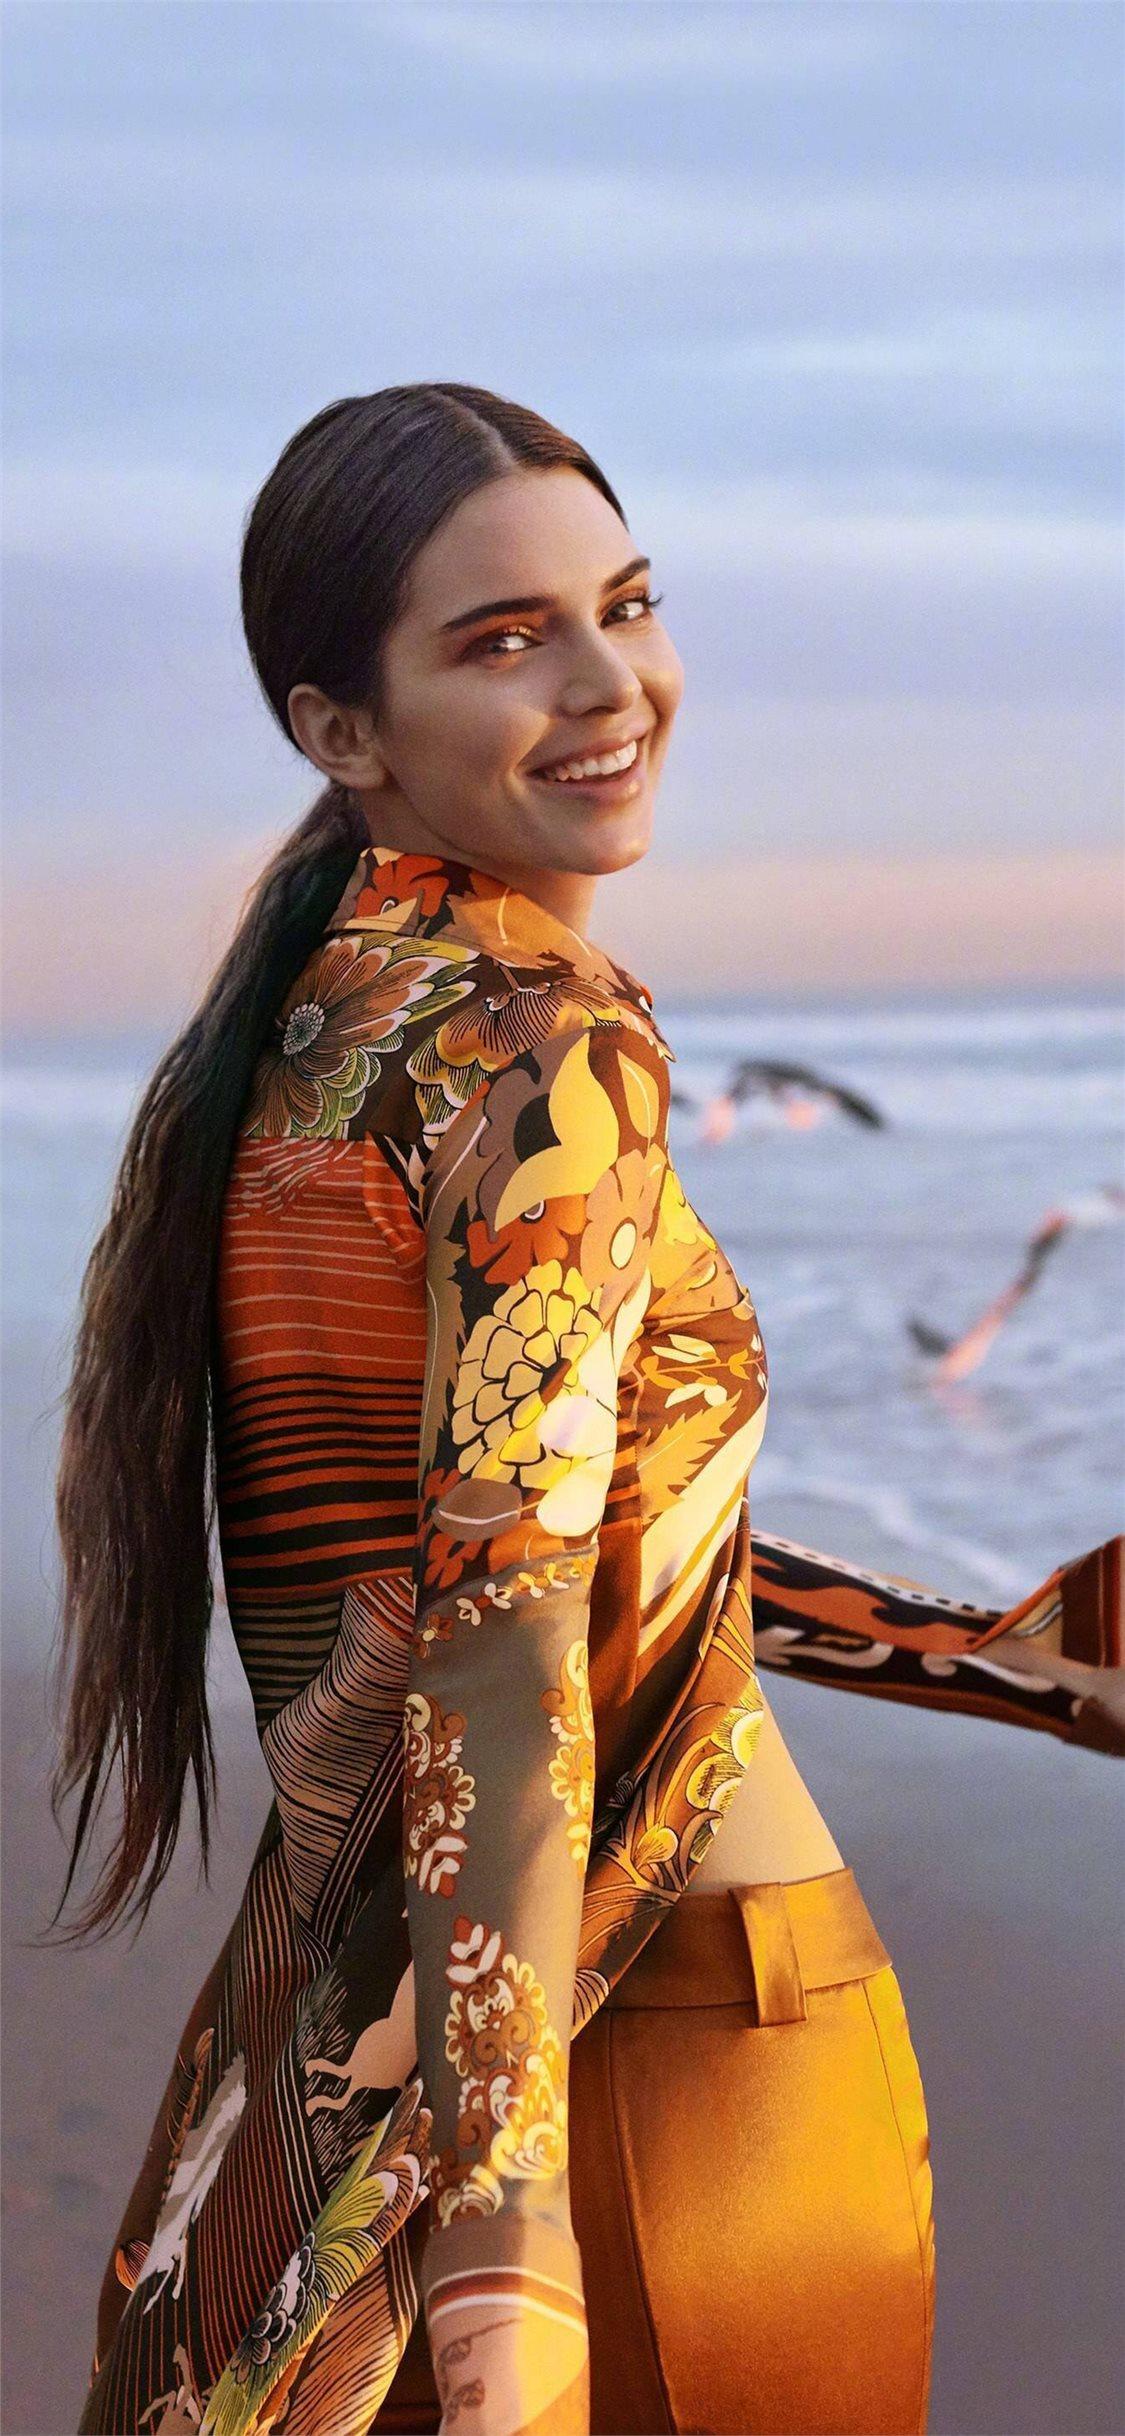 kendall jenner smiling 2019 iPhone Wallpaper Free Download